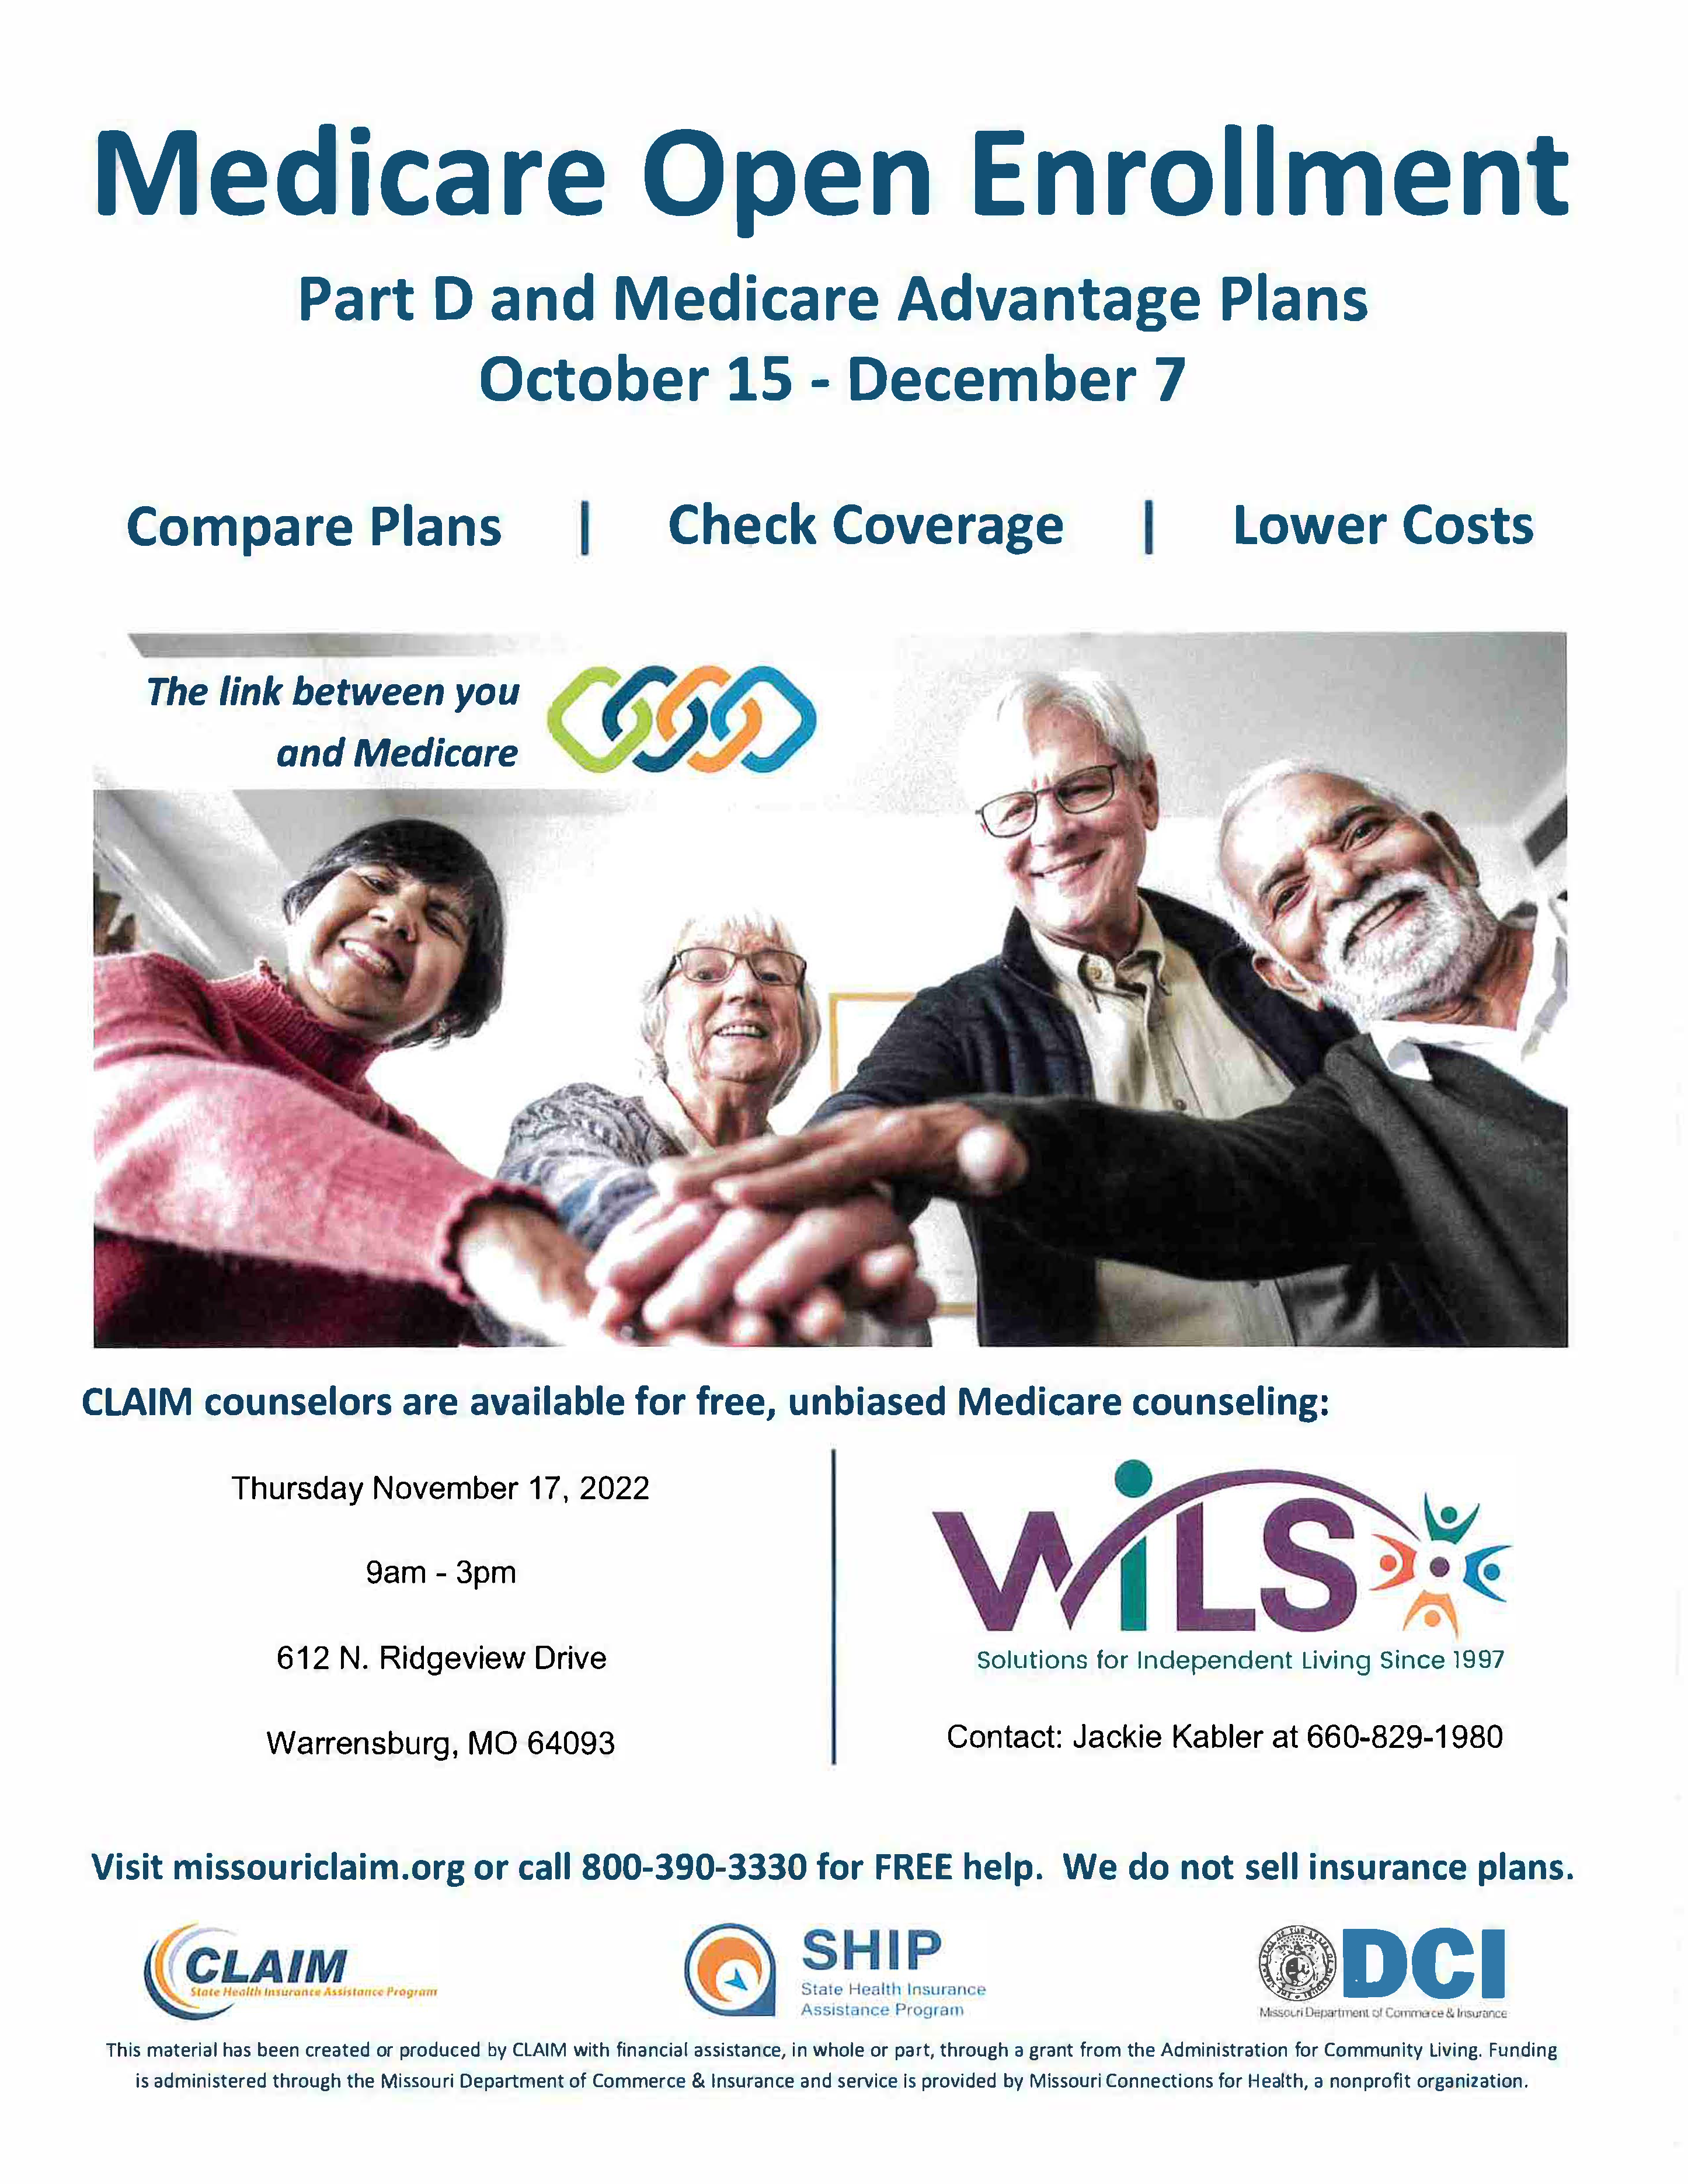 Medicare Open Enrollment Part D and Medicare Advantage Plans October 15 - December 7 Compare Plans, Check Coverage, and Lower Costs. CLAIM counselors are available for free, unbiased Medicare counseling at WILS. Jackie Kabler at 660-829-1980. Visit missouriclaim.org or call 800-390-3330 for FREE help. We do not sell insurance plans. Thursday November 17, 2022 9am -3pm 612 N. Ridgeview Drive Warrensburg, MO 64093